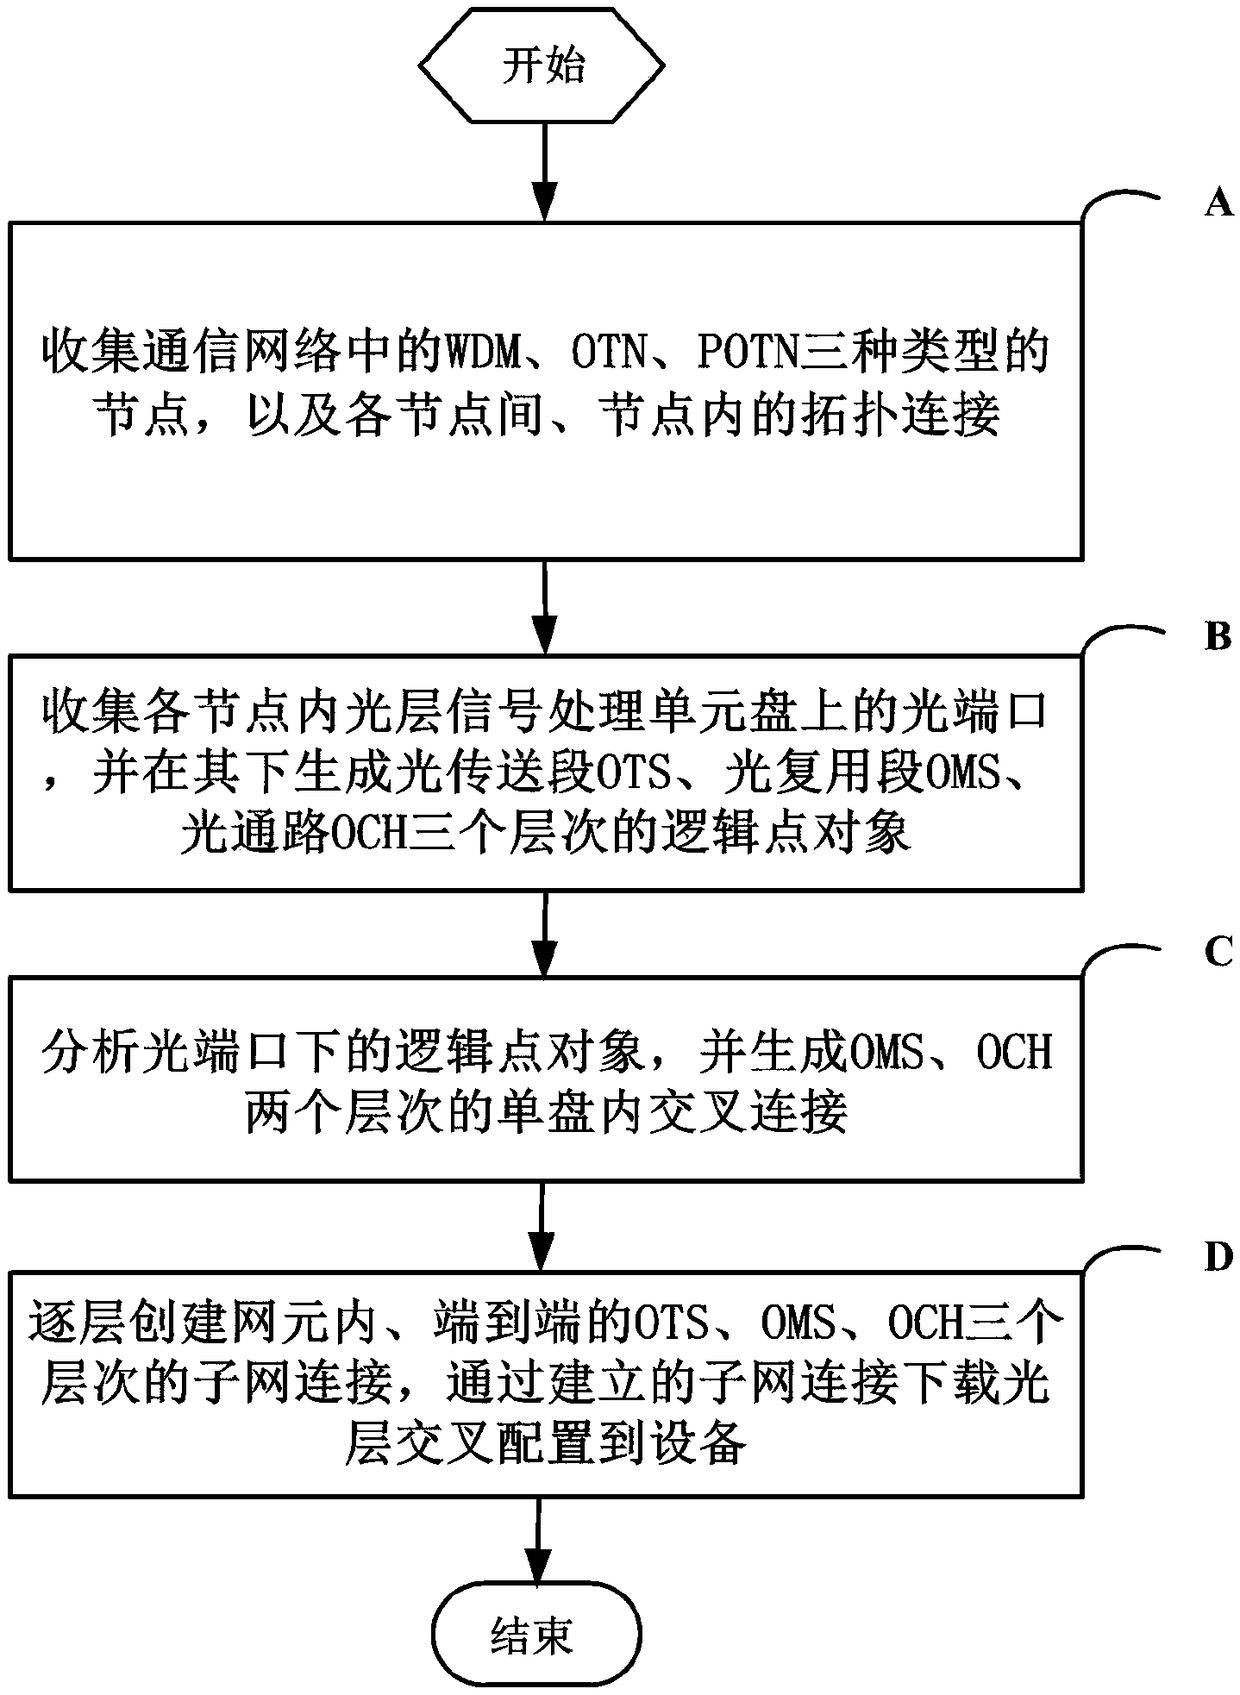 Optical-layer service layering model configuration method and system in network management system